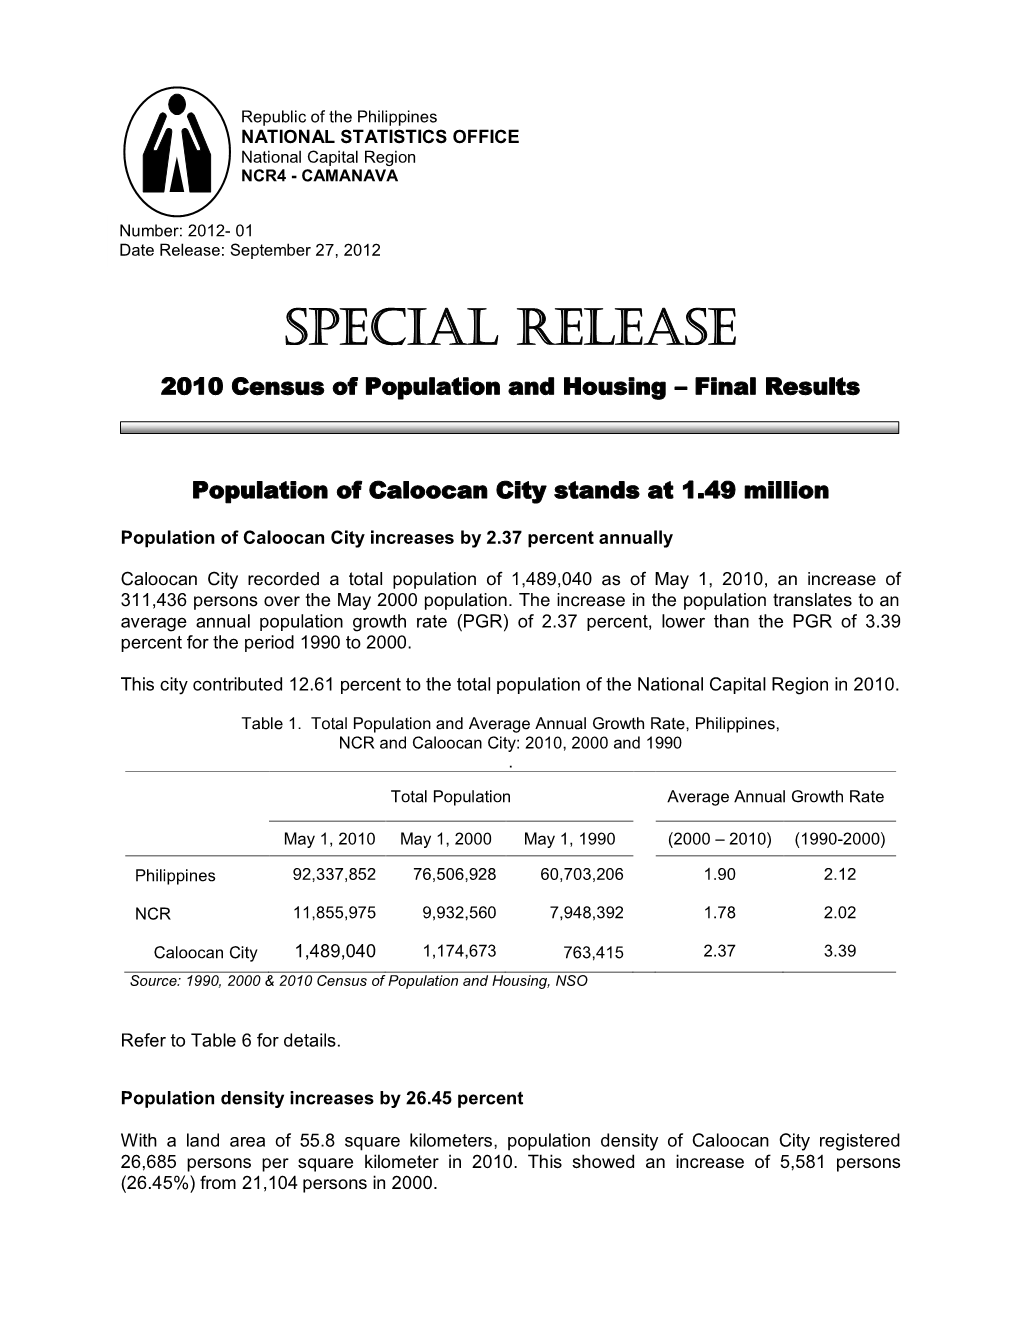 Caloocan City Stands at 1.49 Million